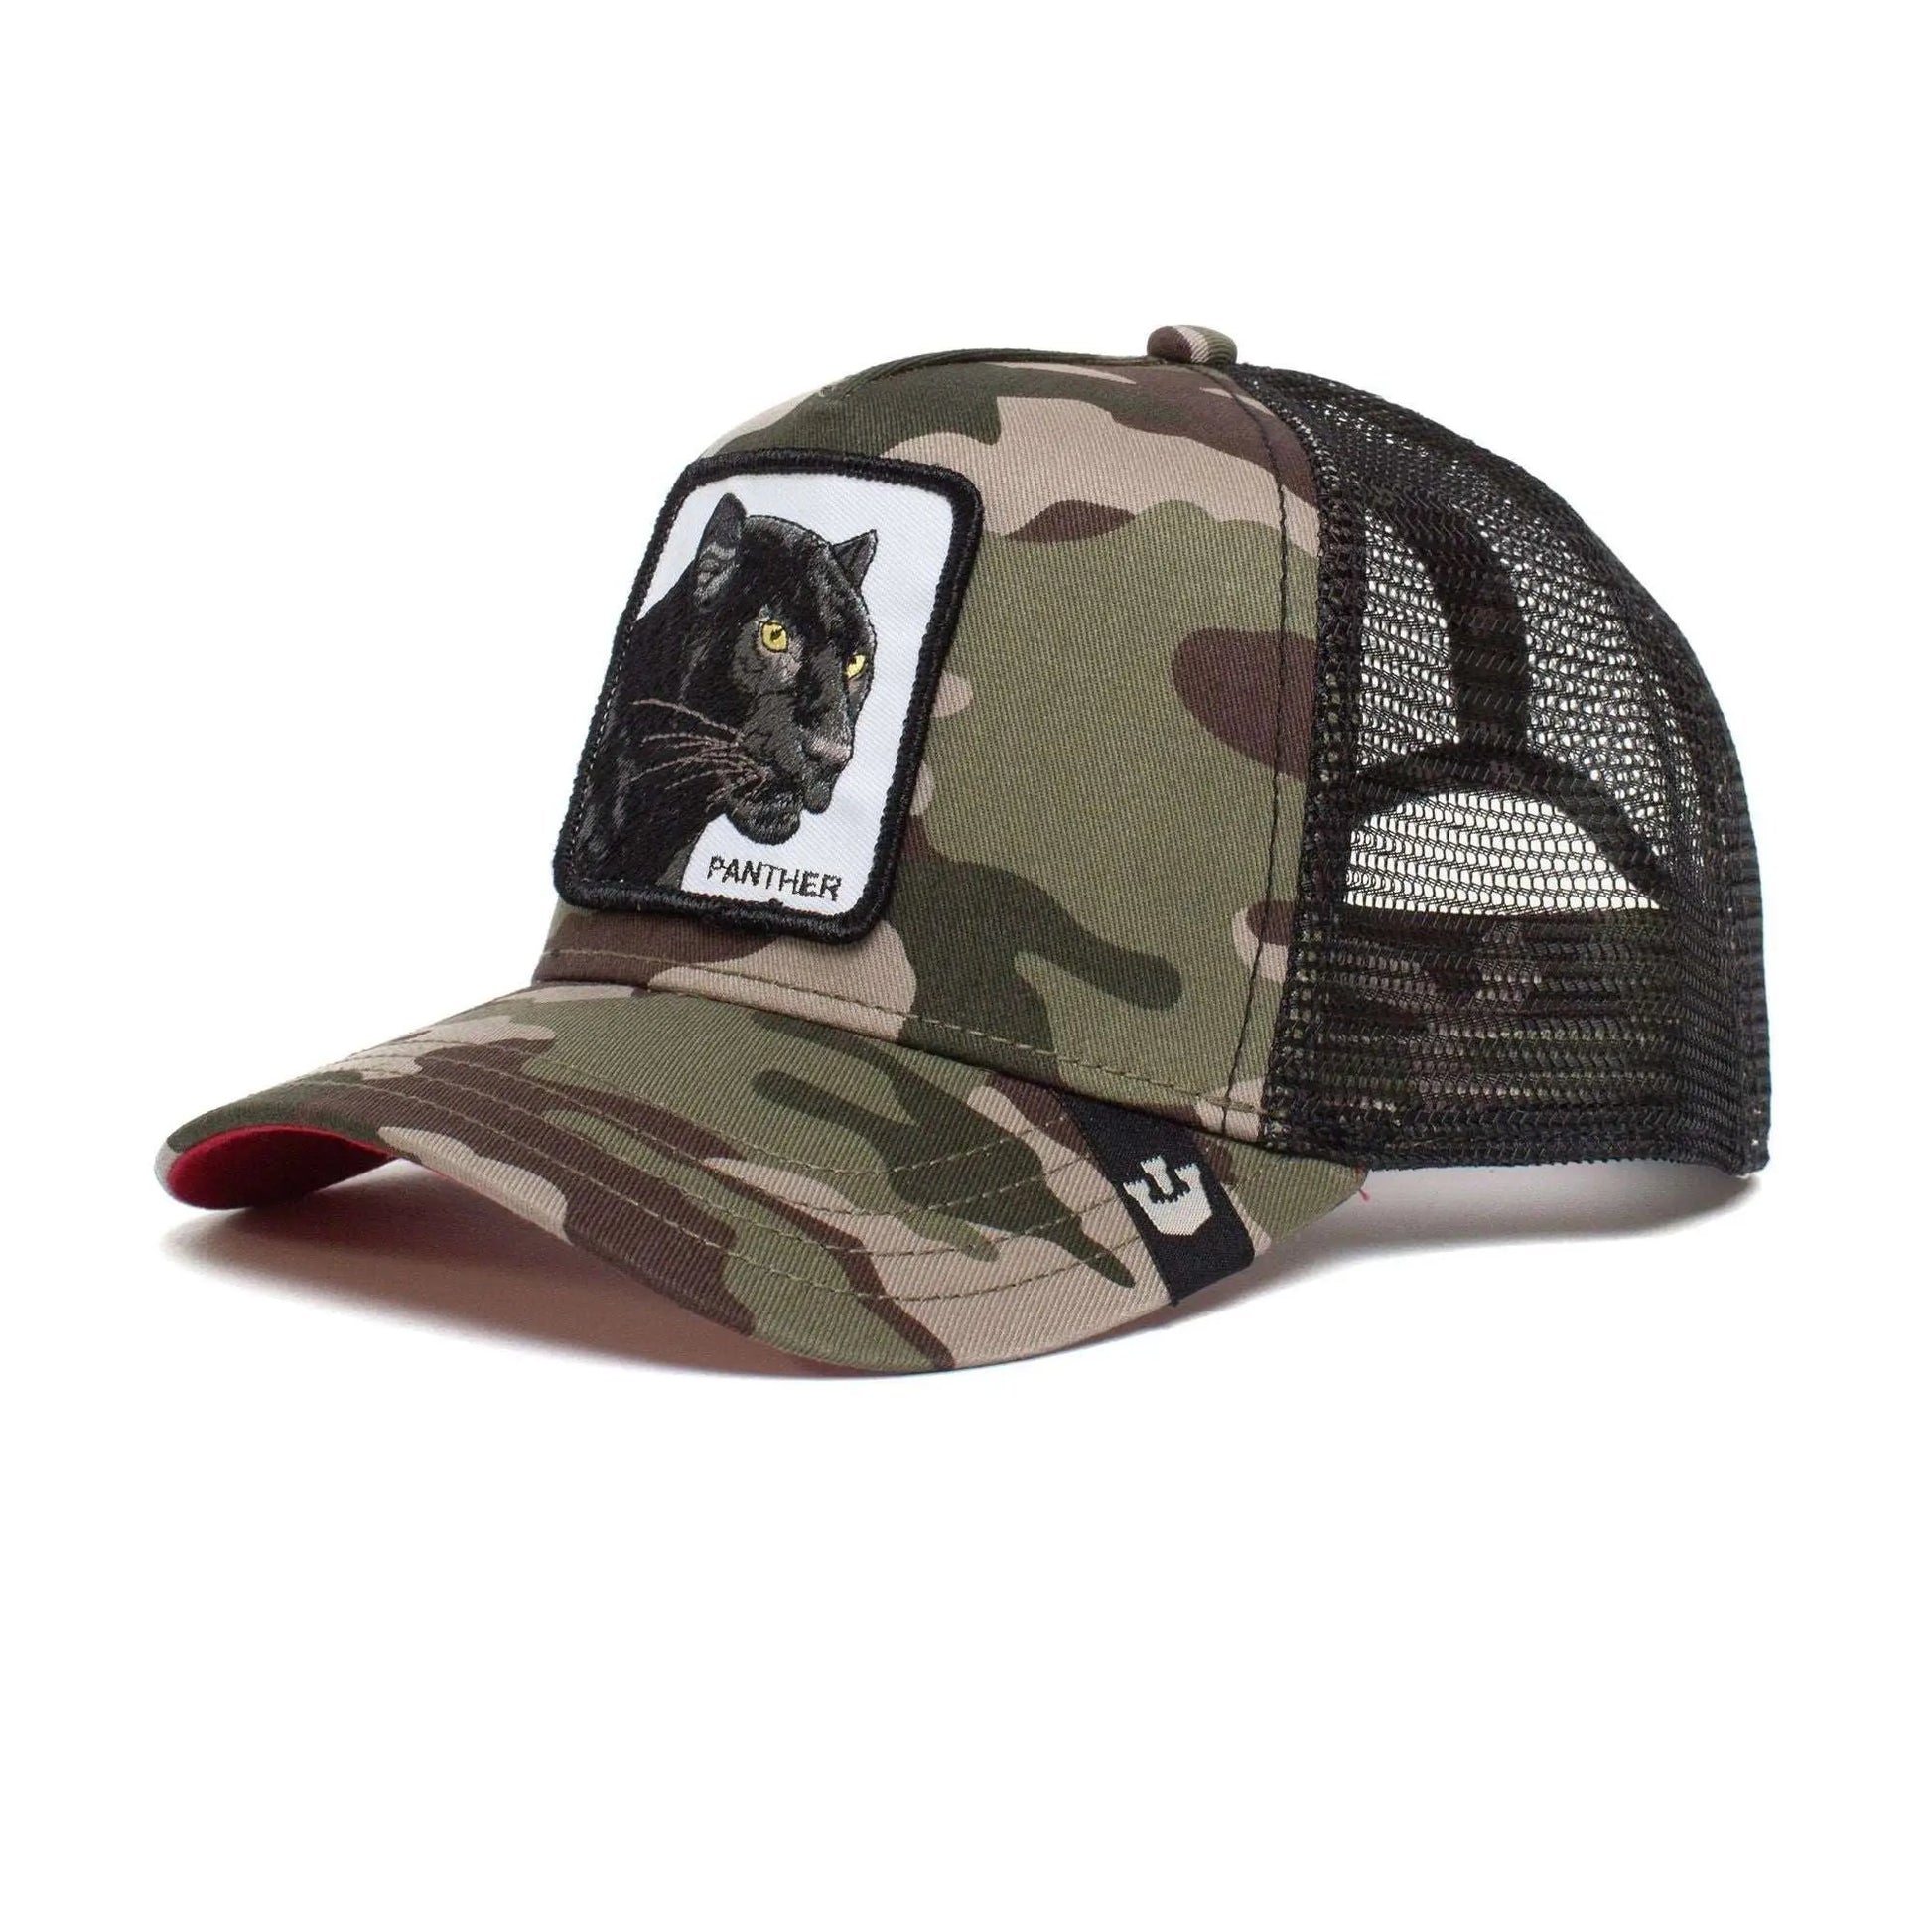 Mesh Hats - The Panther Camo